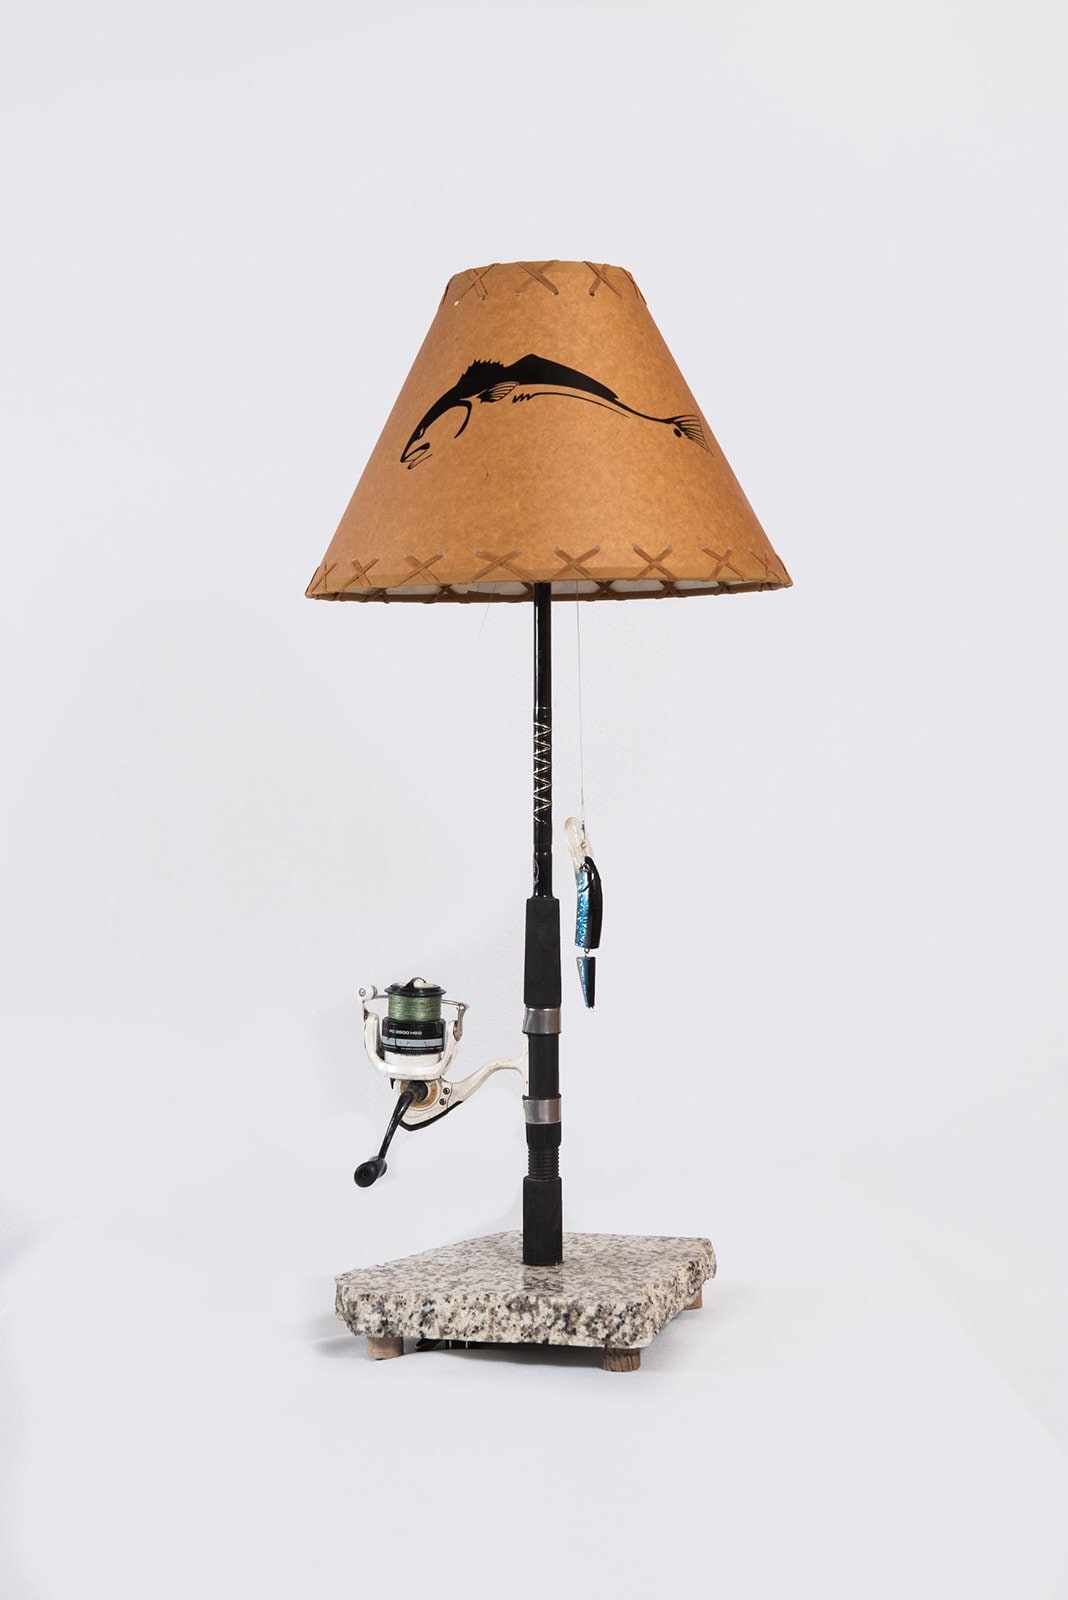 Buy Fishing Pole Lamp Online In India -  India